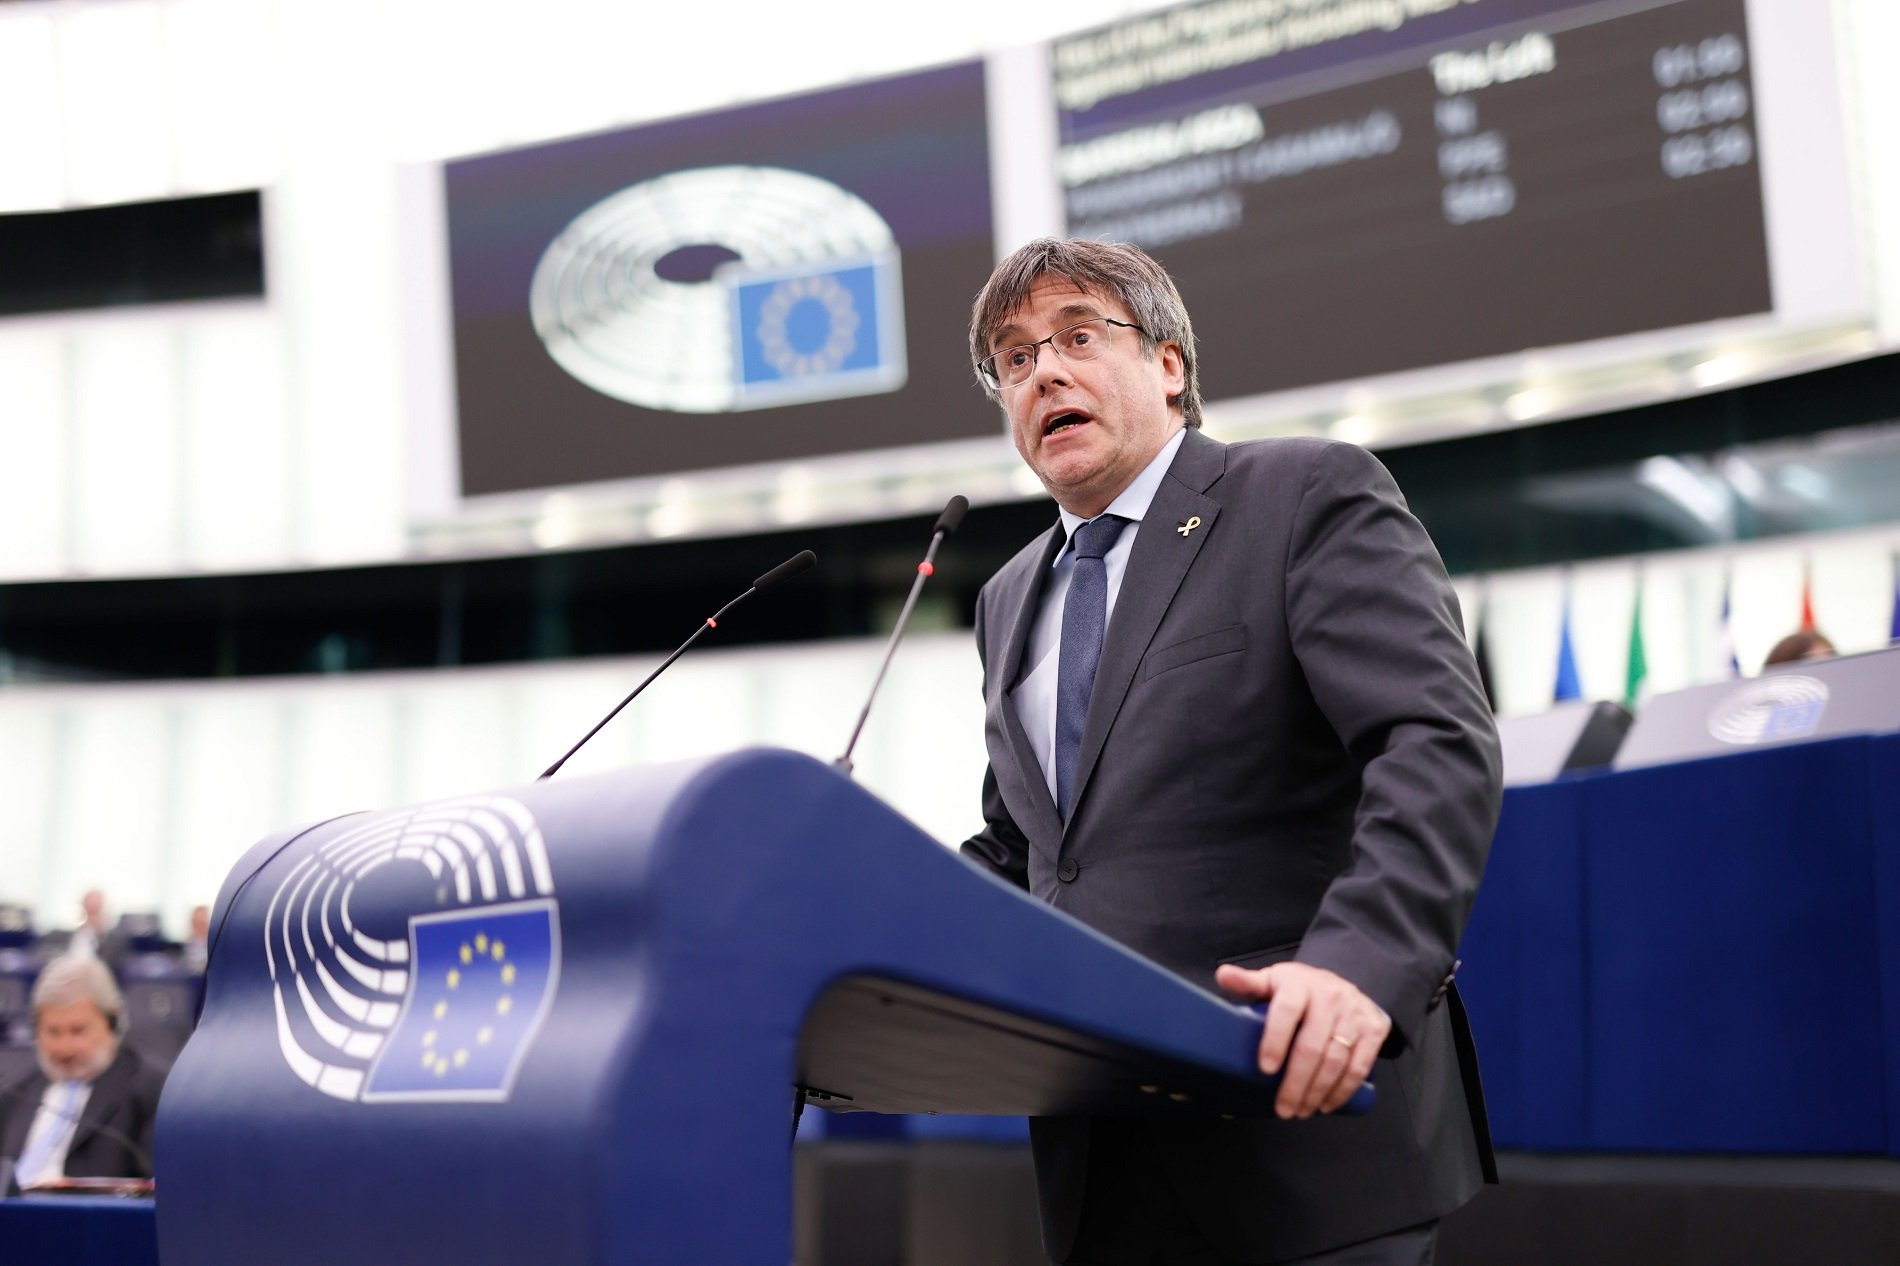 Puigdemont denounces EU "indifference" to mass espionage against Catalans, 6 months on